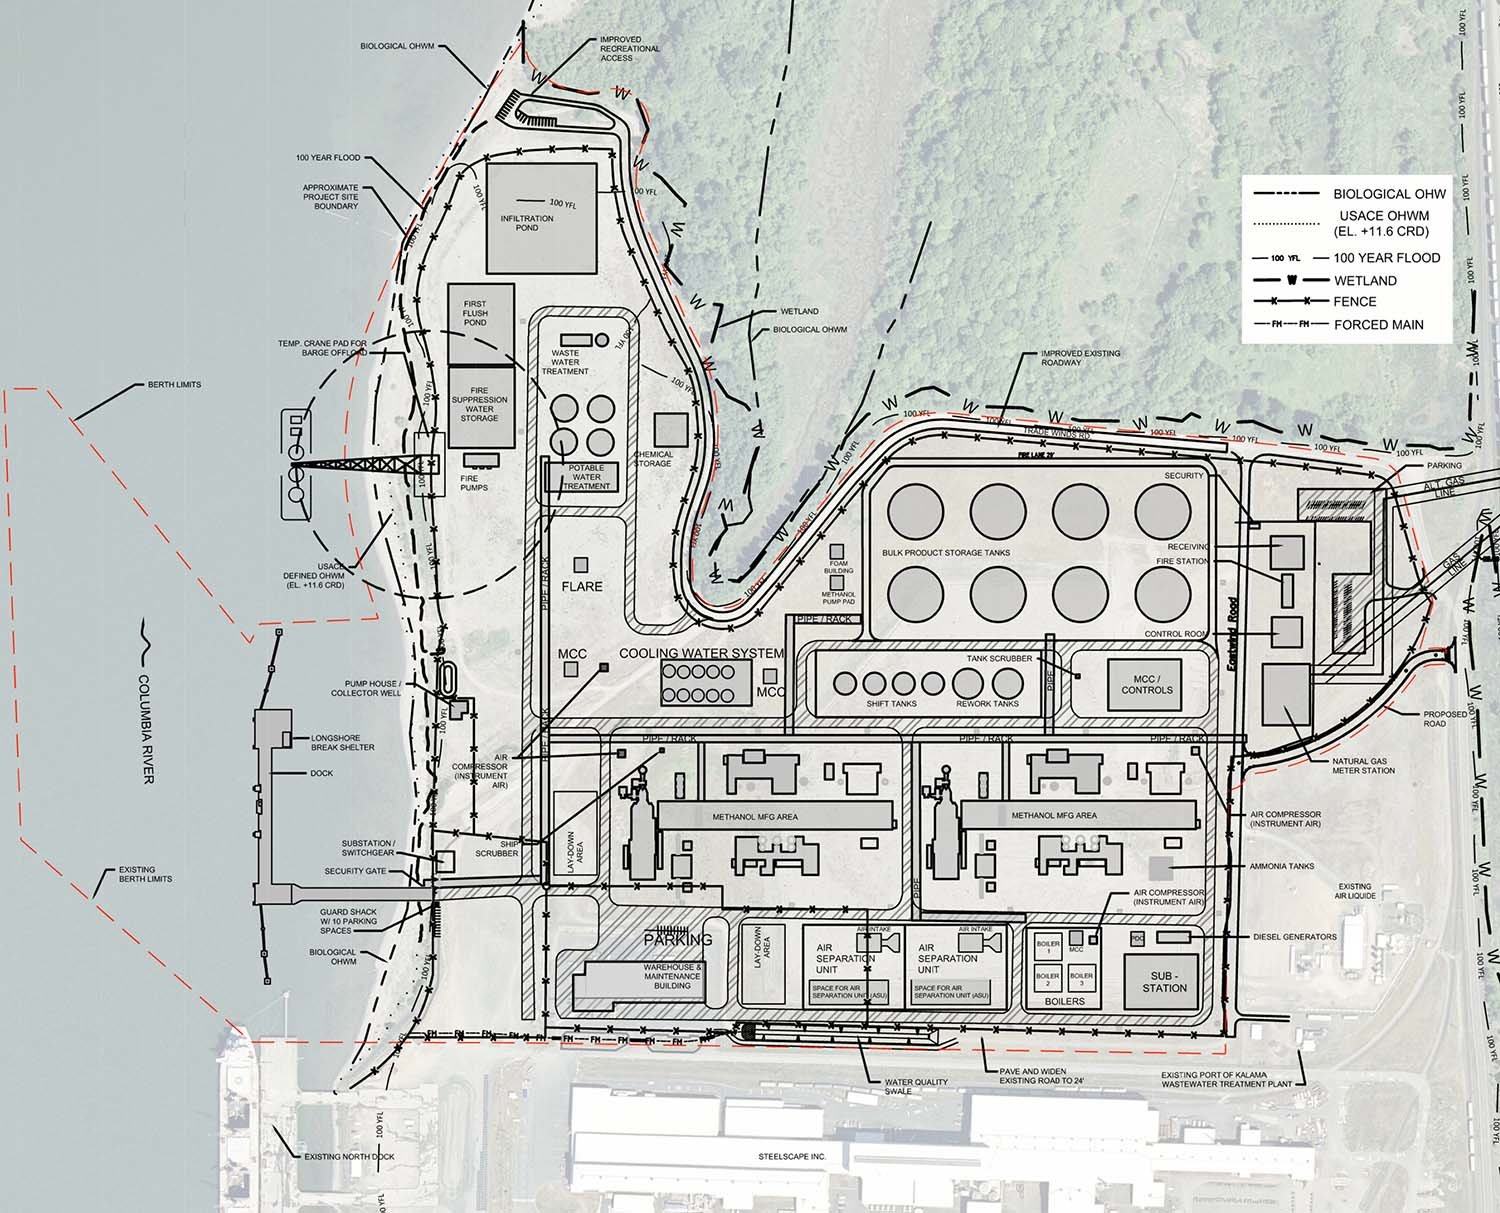 A 2017 plan for the proposed methanol plant in Kalama